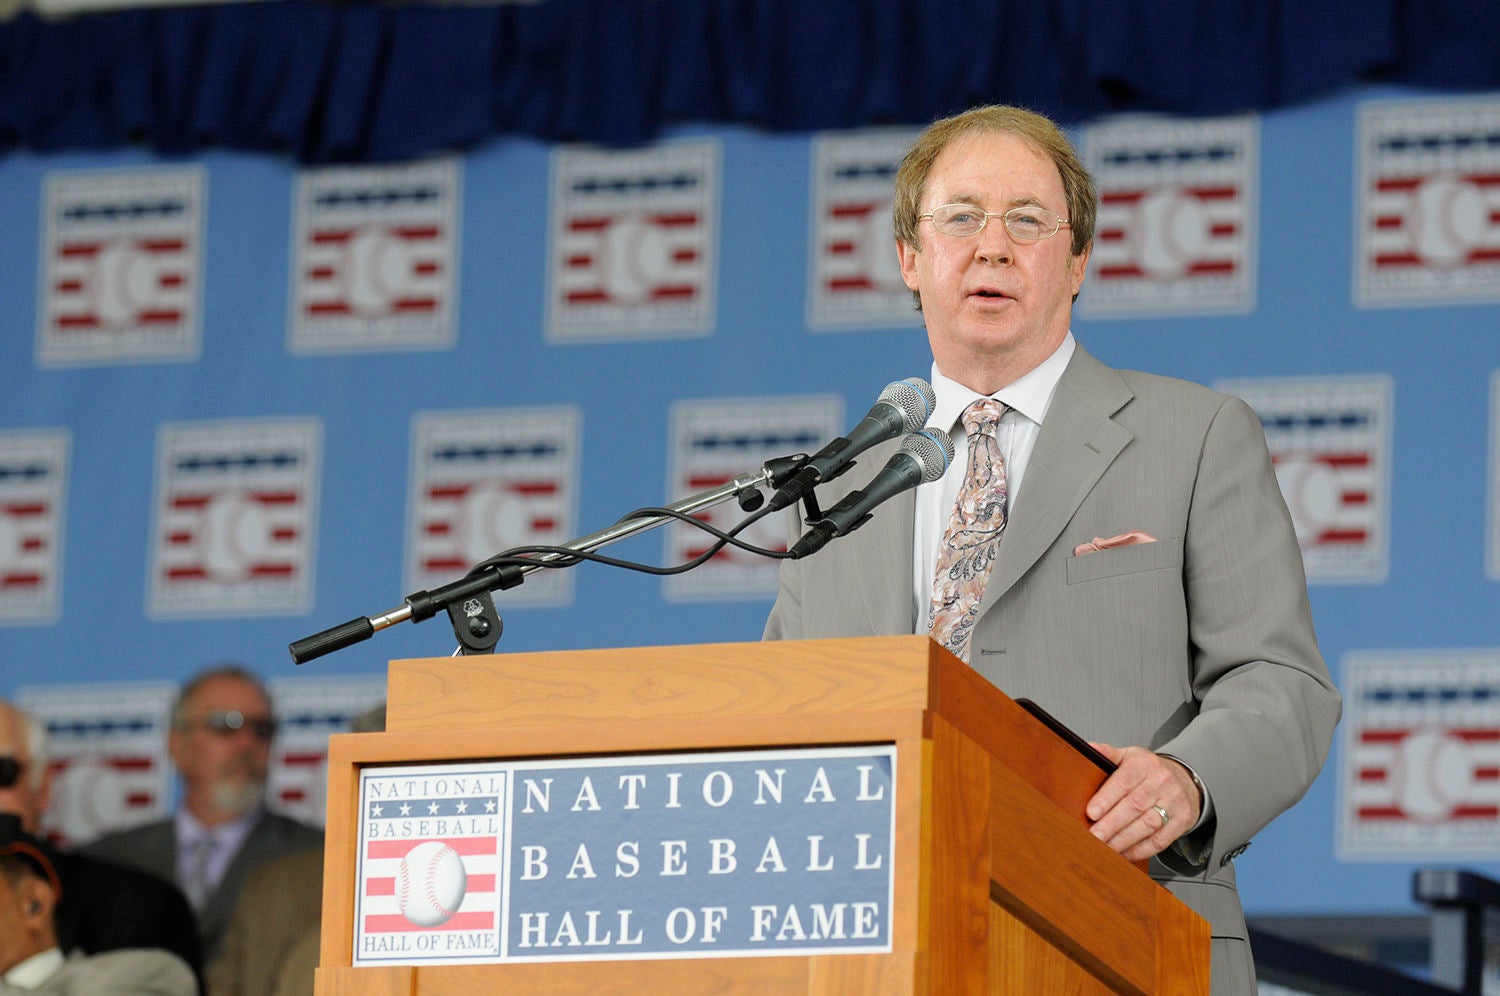 Shortstops: Spink Award winner Bill Madden donates papers to the Hall of Fame | Baseball Hall of Fame